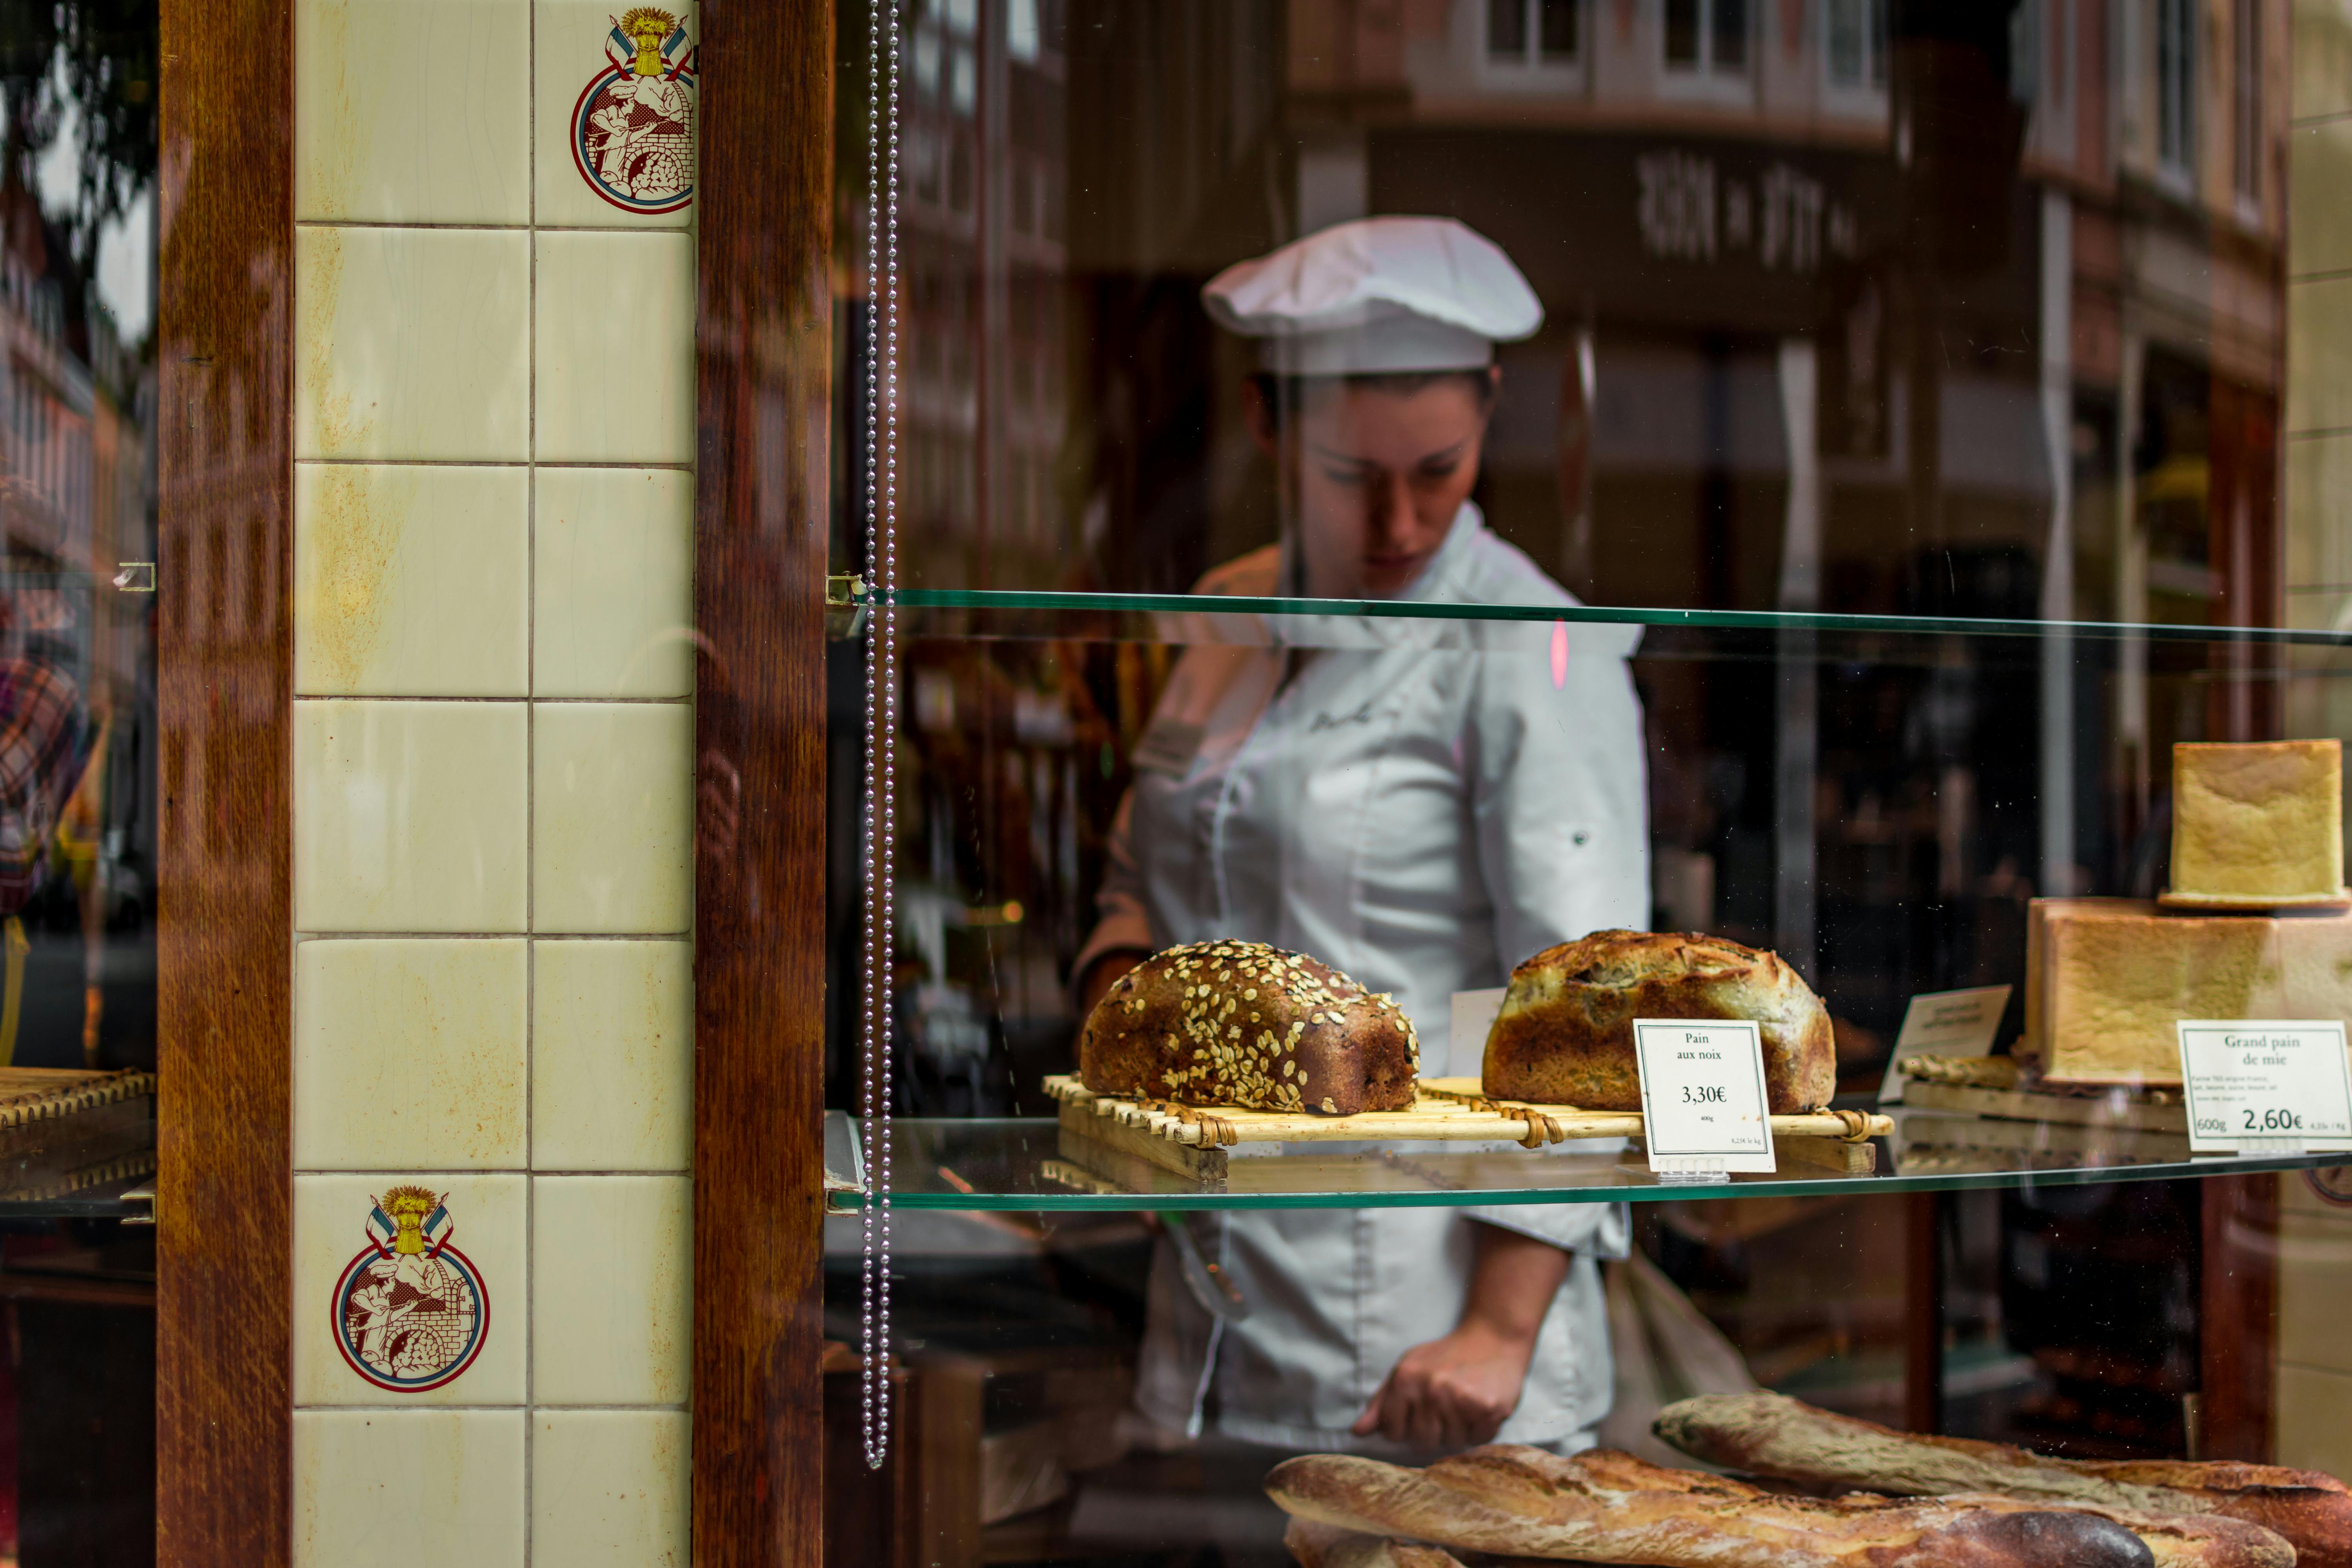 A chef pictured looking down | Source: Pexels